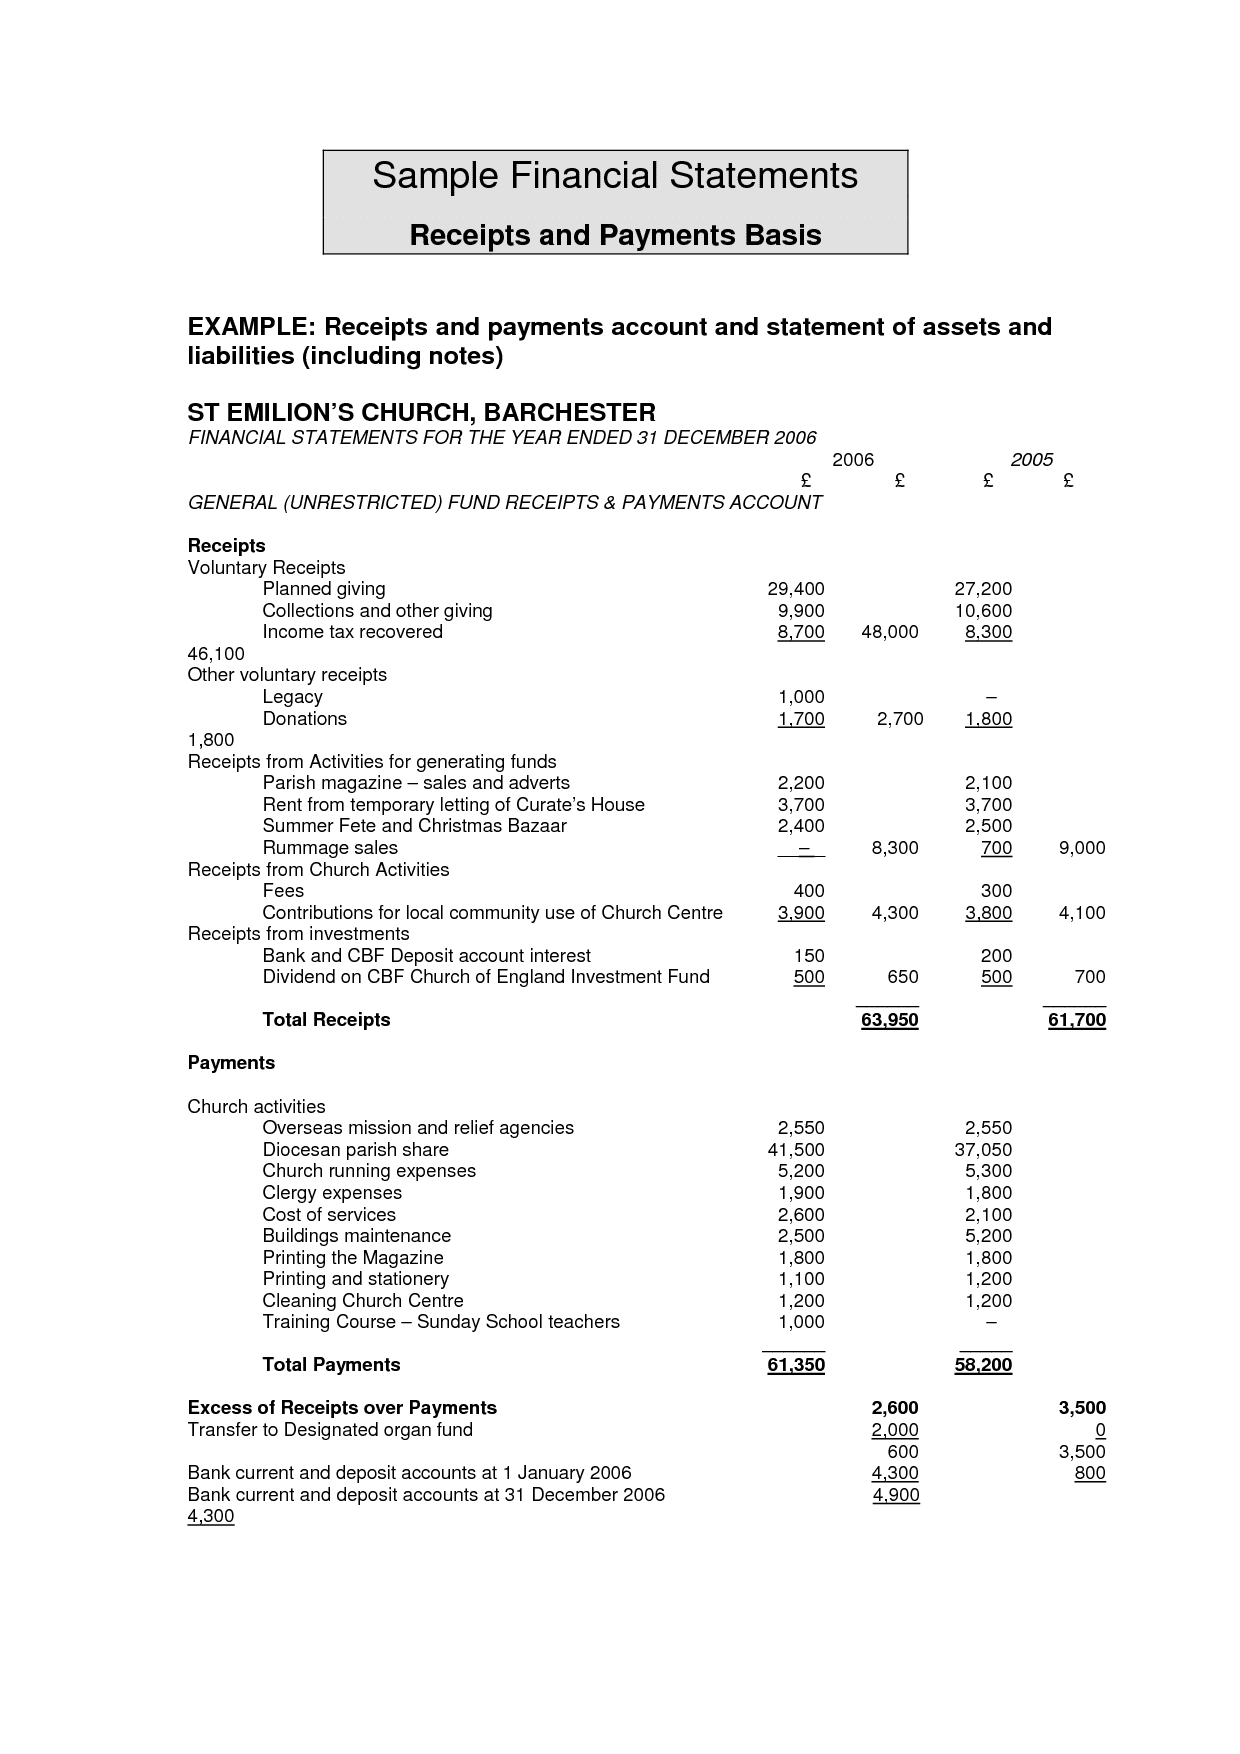 Sample Church Balance Sheet And Income Statement And Small Church Financial Statement